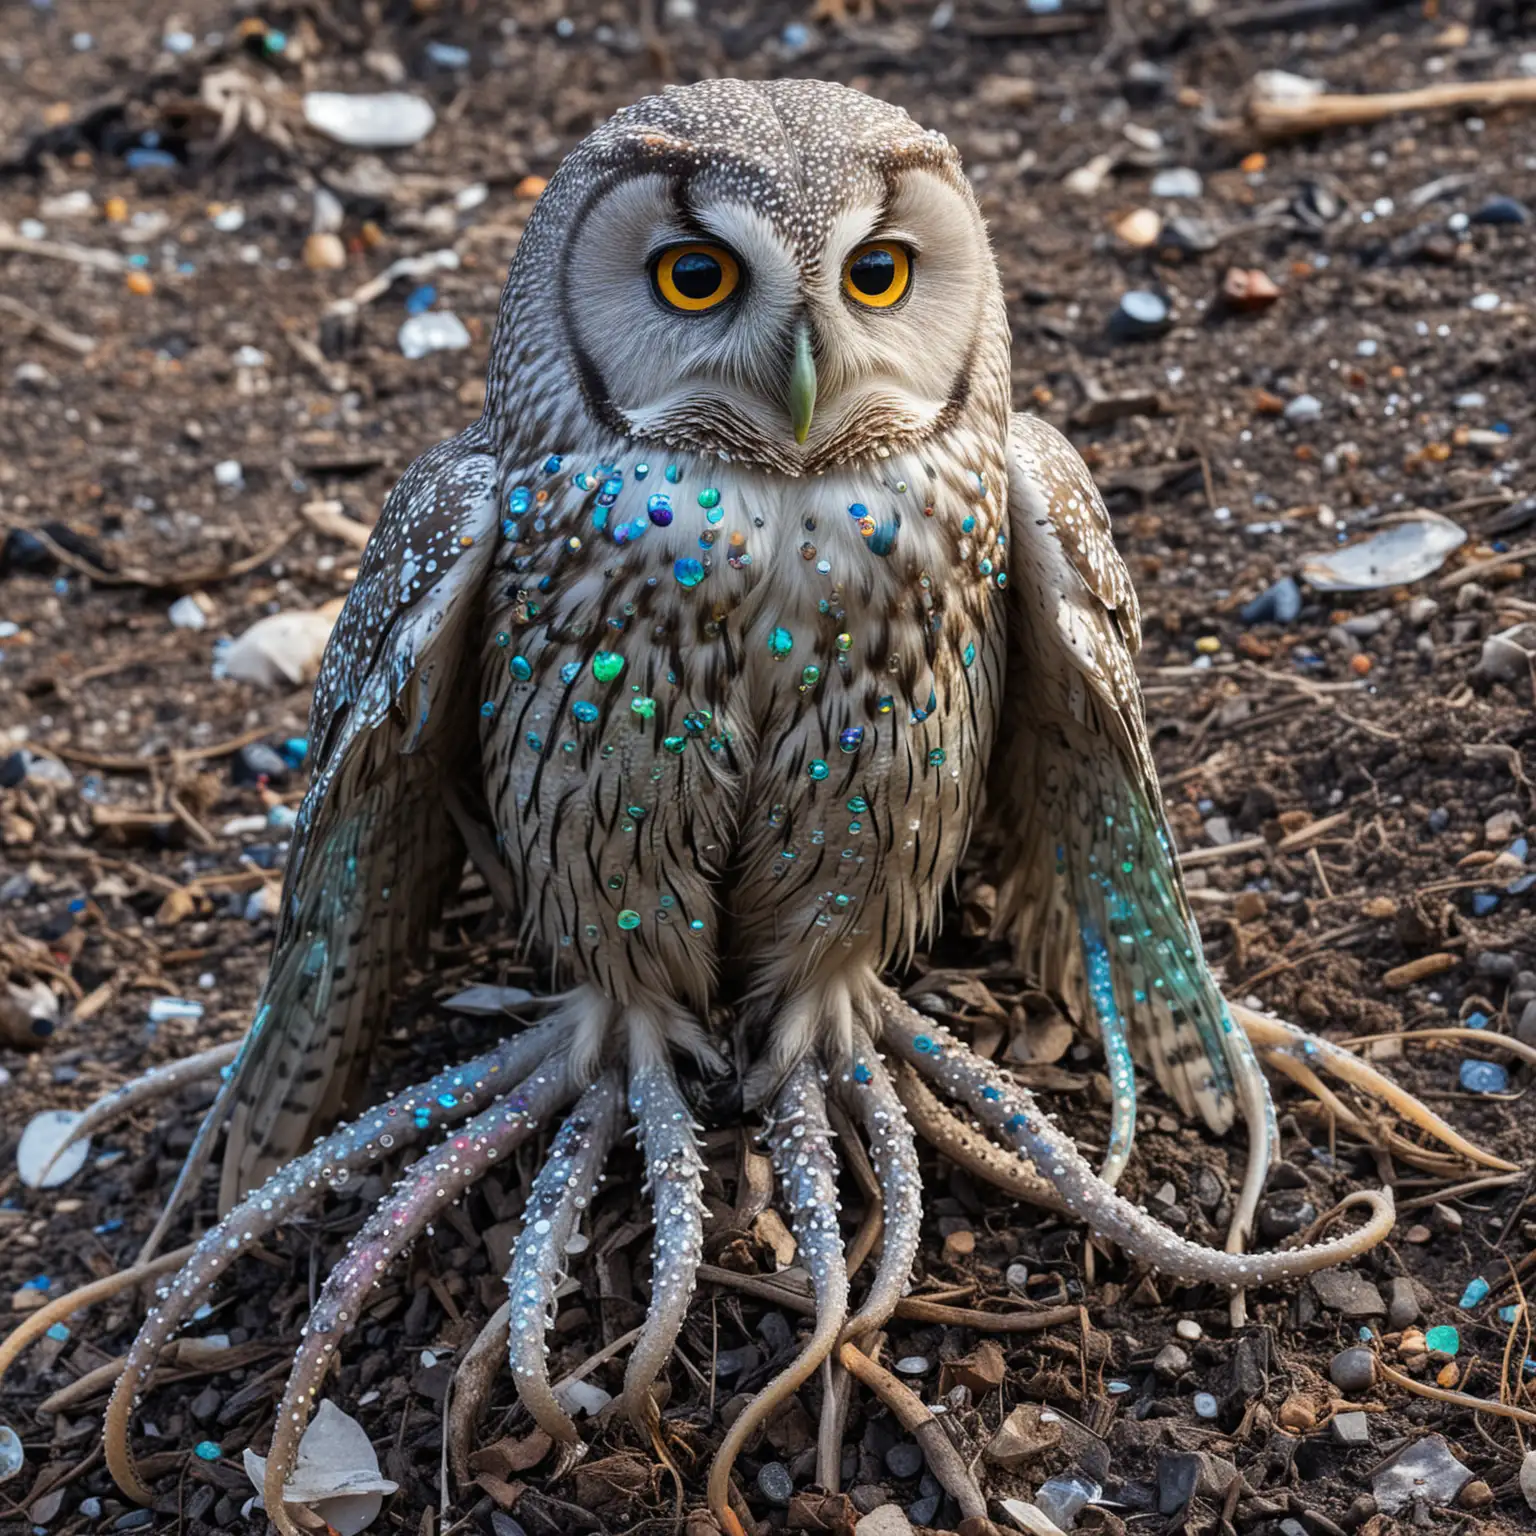 Slimy iridescent tentacles on an owl at a garbage dump site. Tentacles coming from wings all over, ground has lots of dots and pores